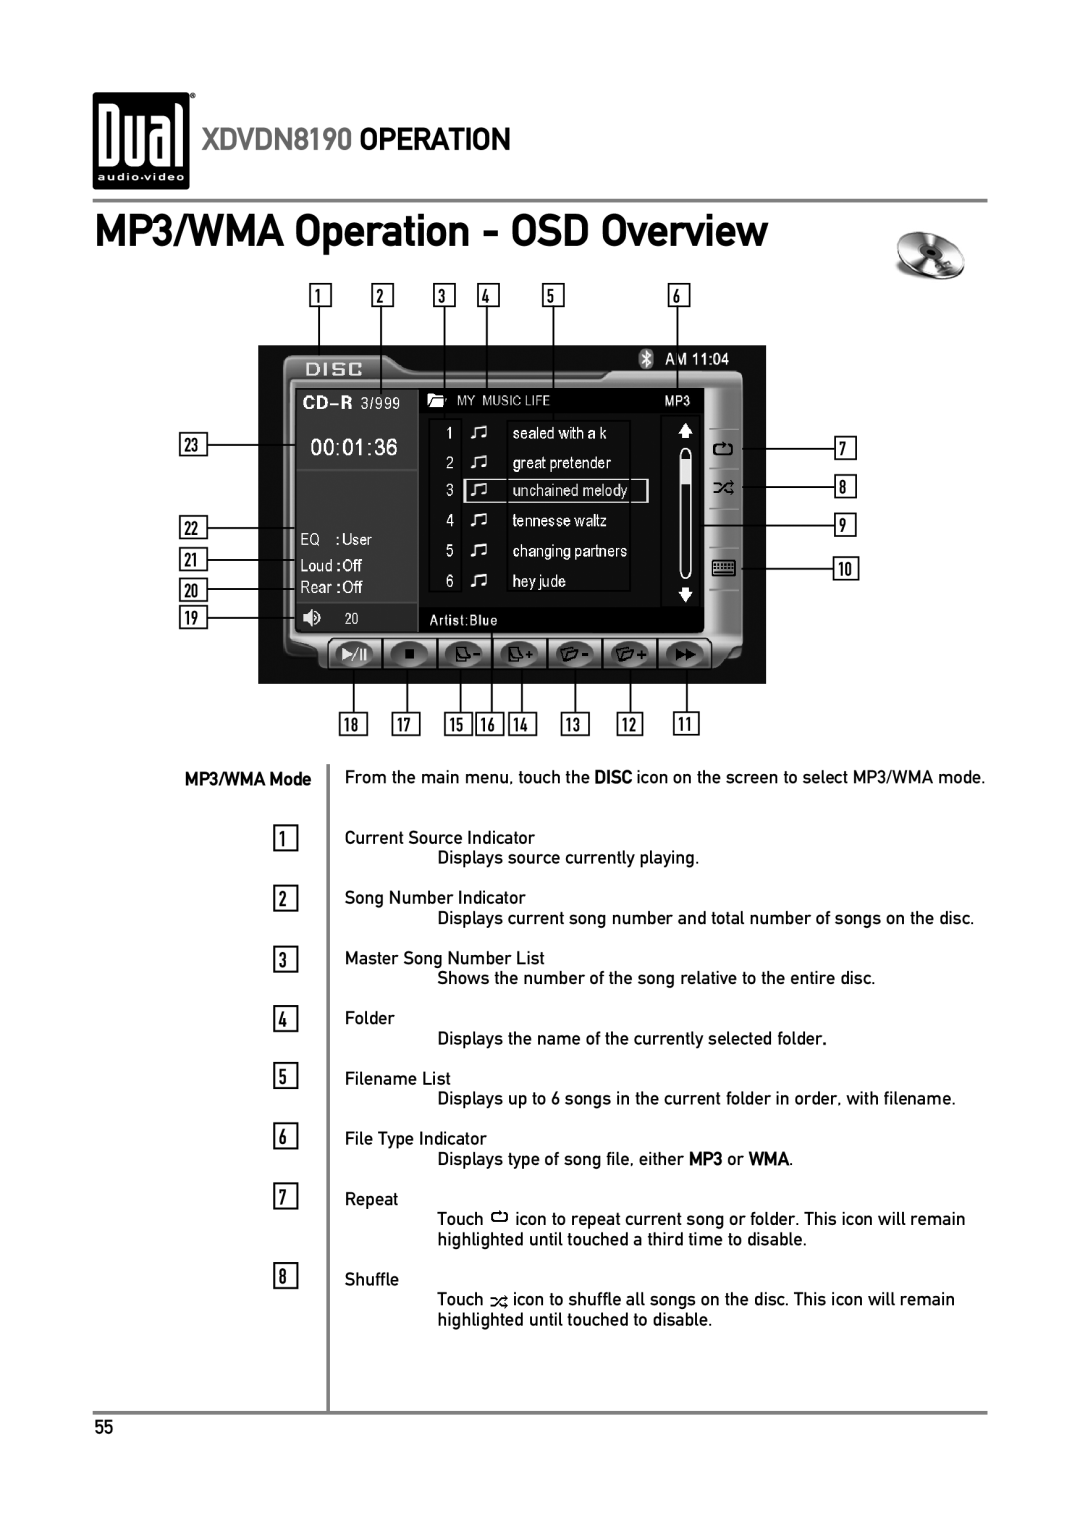 Dual owner manual MP3/WMA Operation - OSD Overview, XDVDN8190 OPERATION, MP3/WMA Mode 